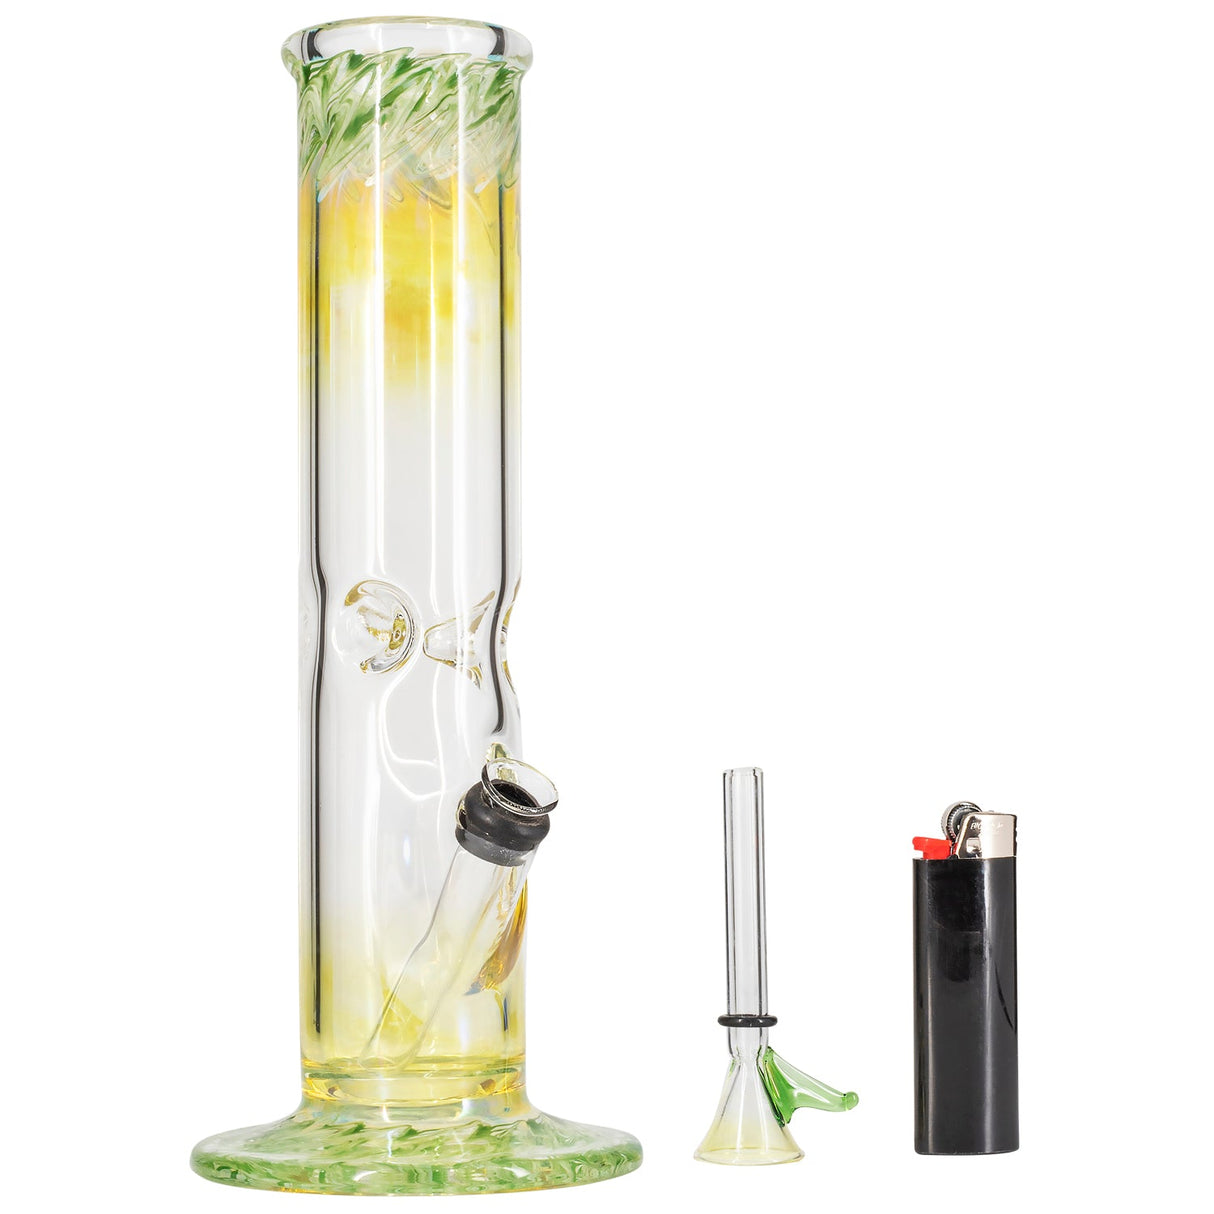 LA Pipes "The Chong-Bong" Classic Straight Borosilicate Glass Bong with Grommet Joint and Lighter